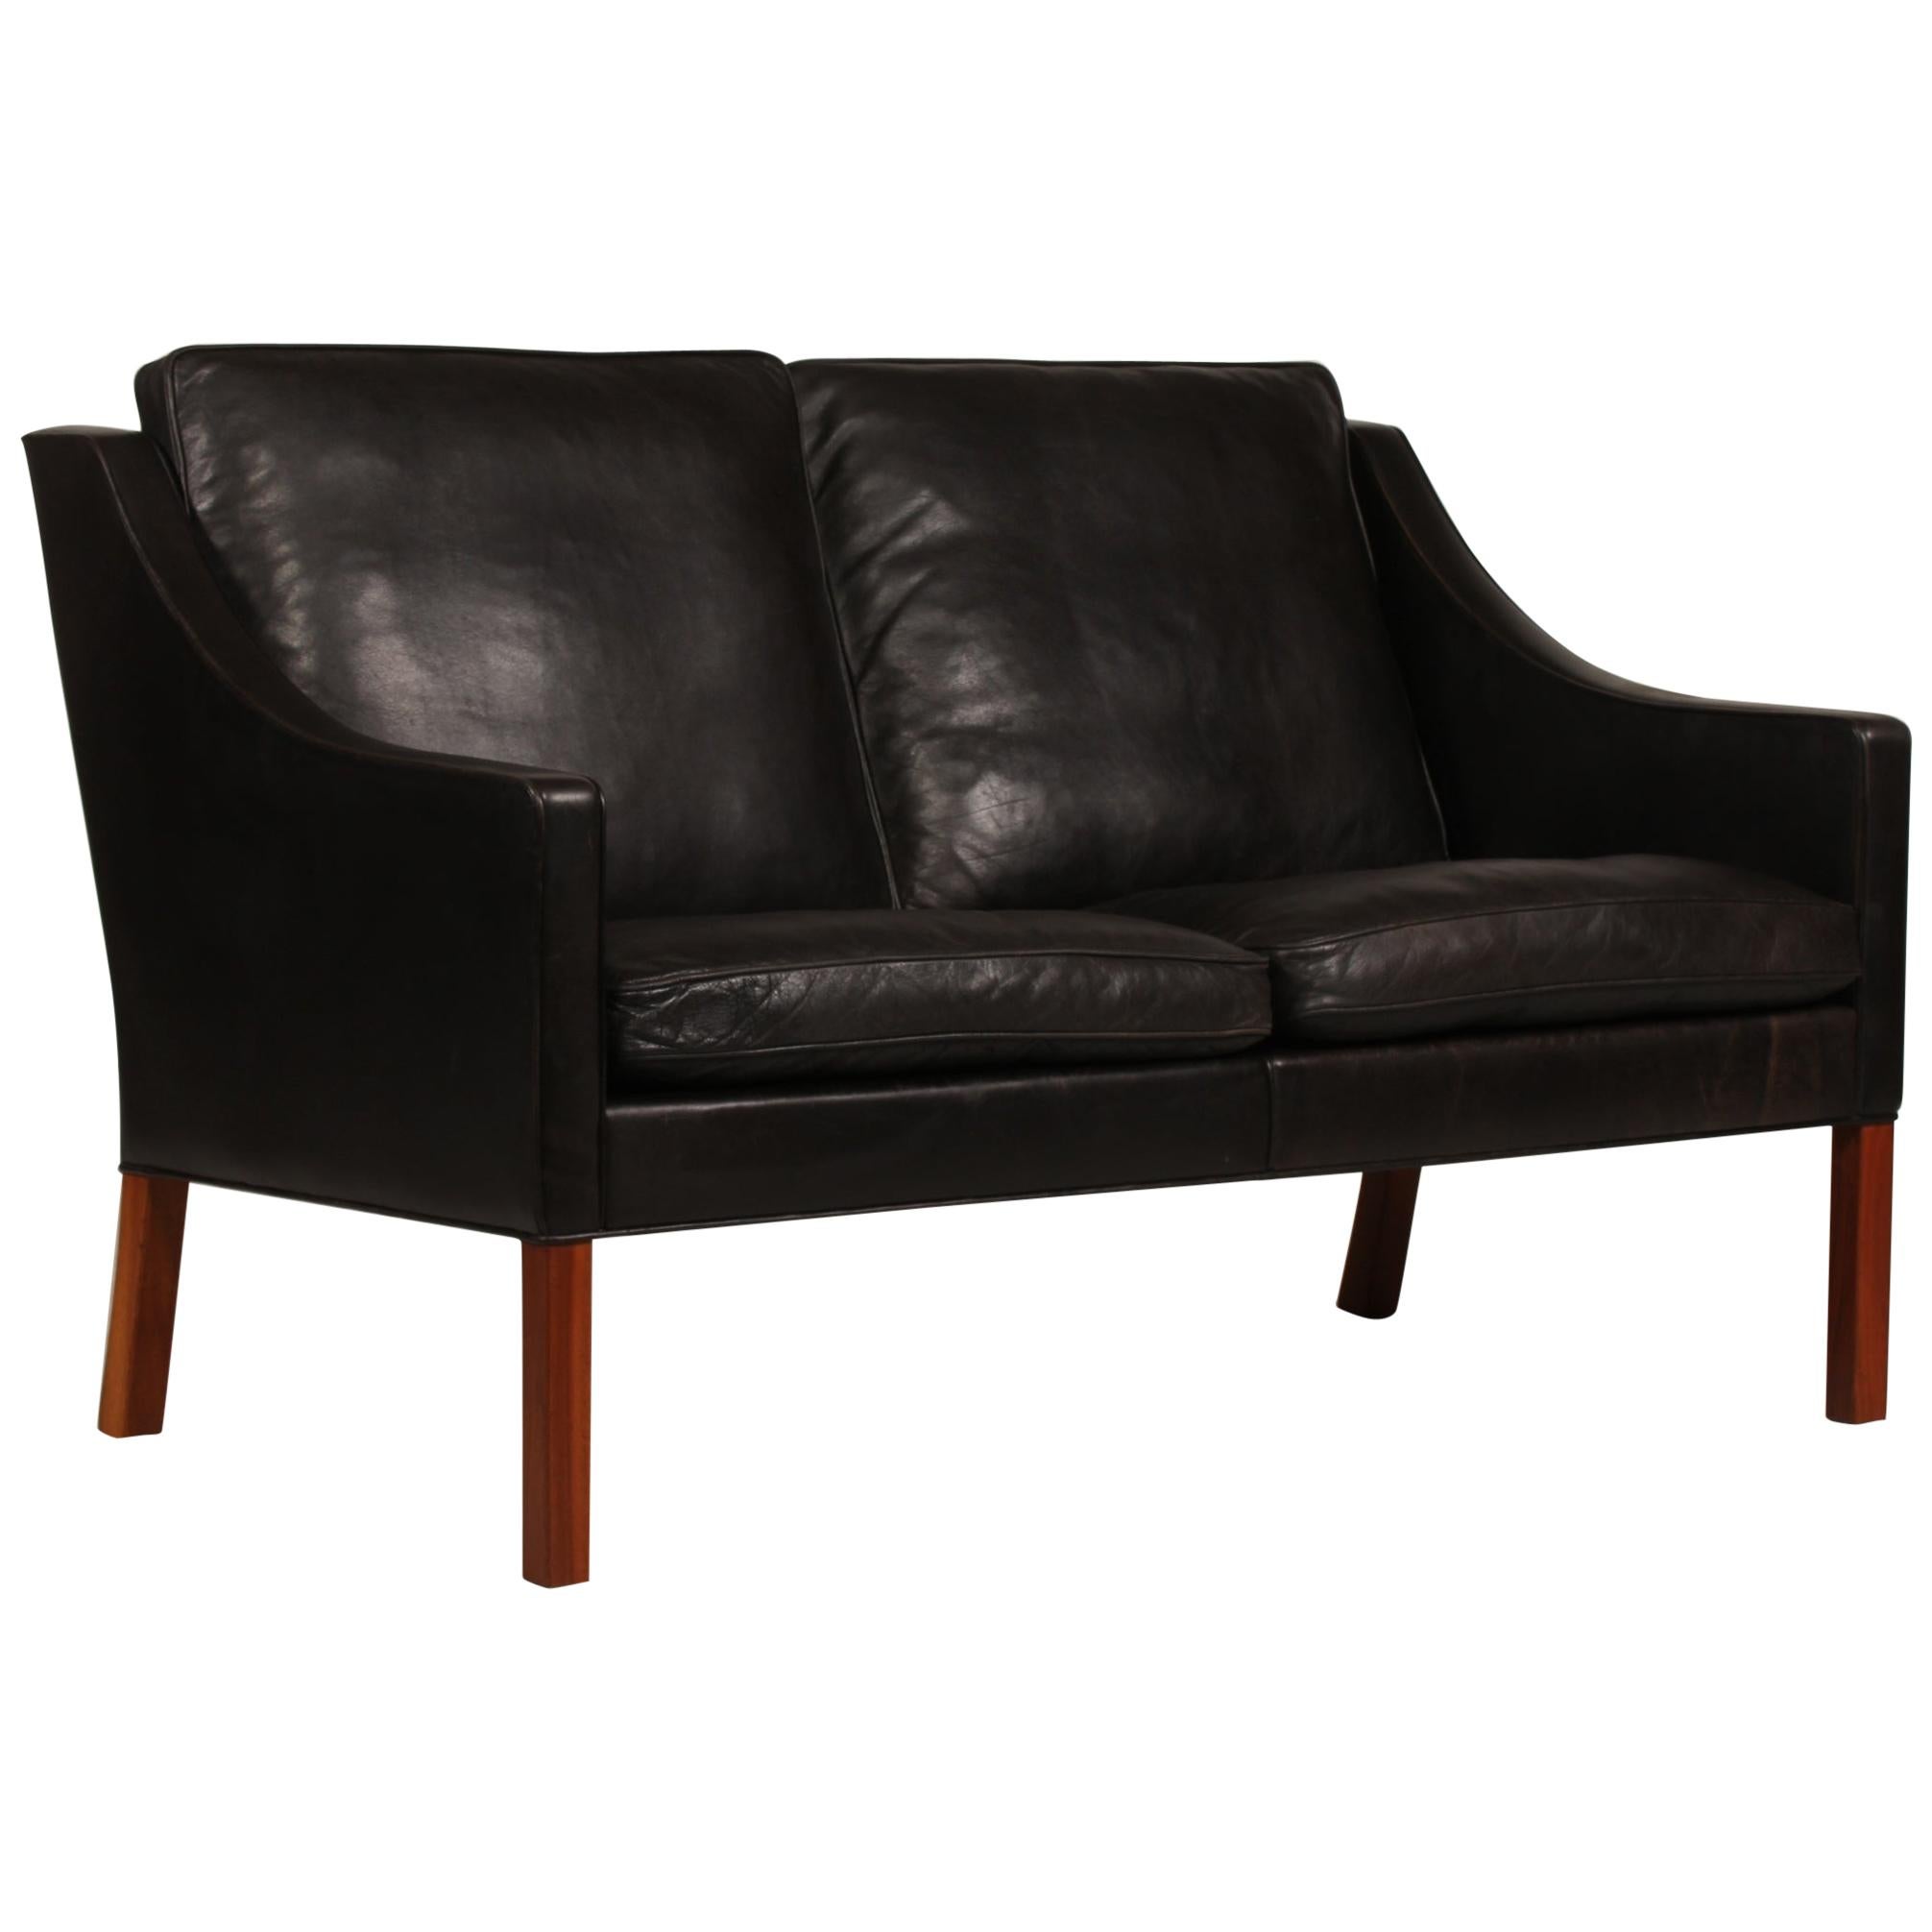 Børge Mogensen Sofa 2208 with Black Leather by Fredericia Furniture, Denmark For Sale